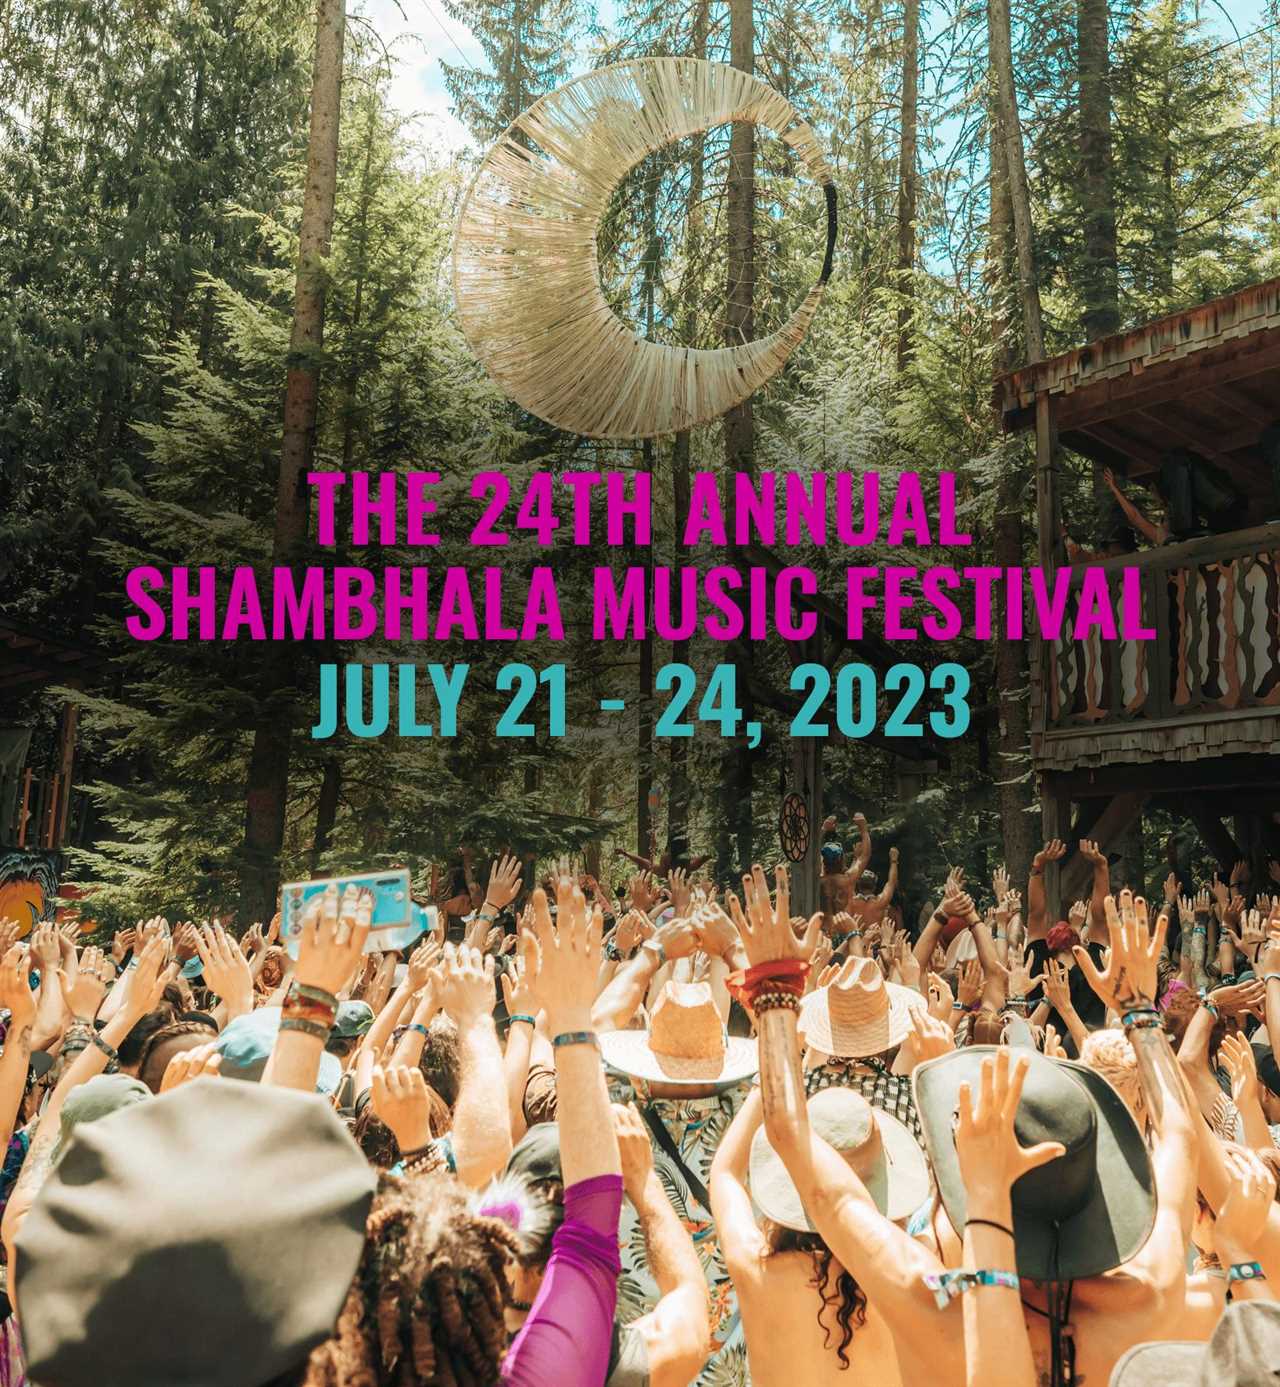 Shambhala 2023 Tickets: Here’s What You Need To Know